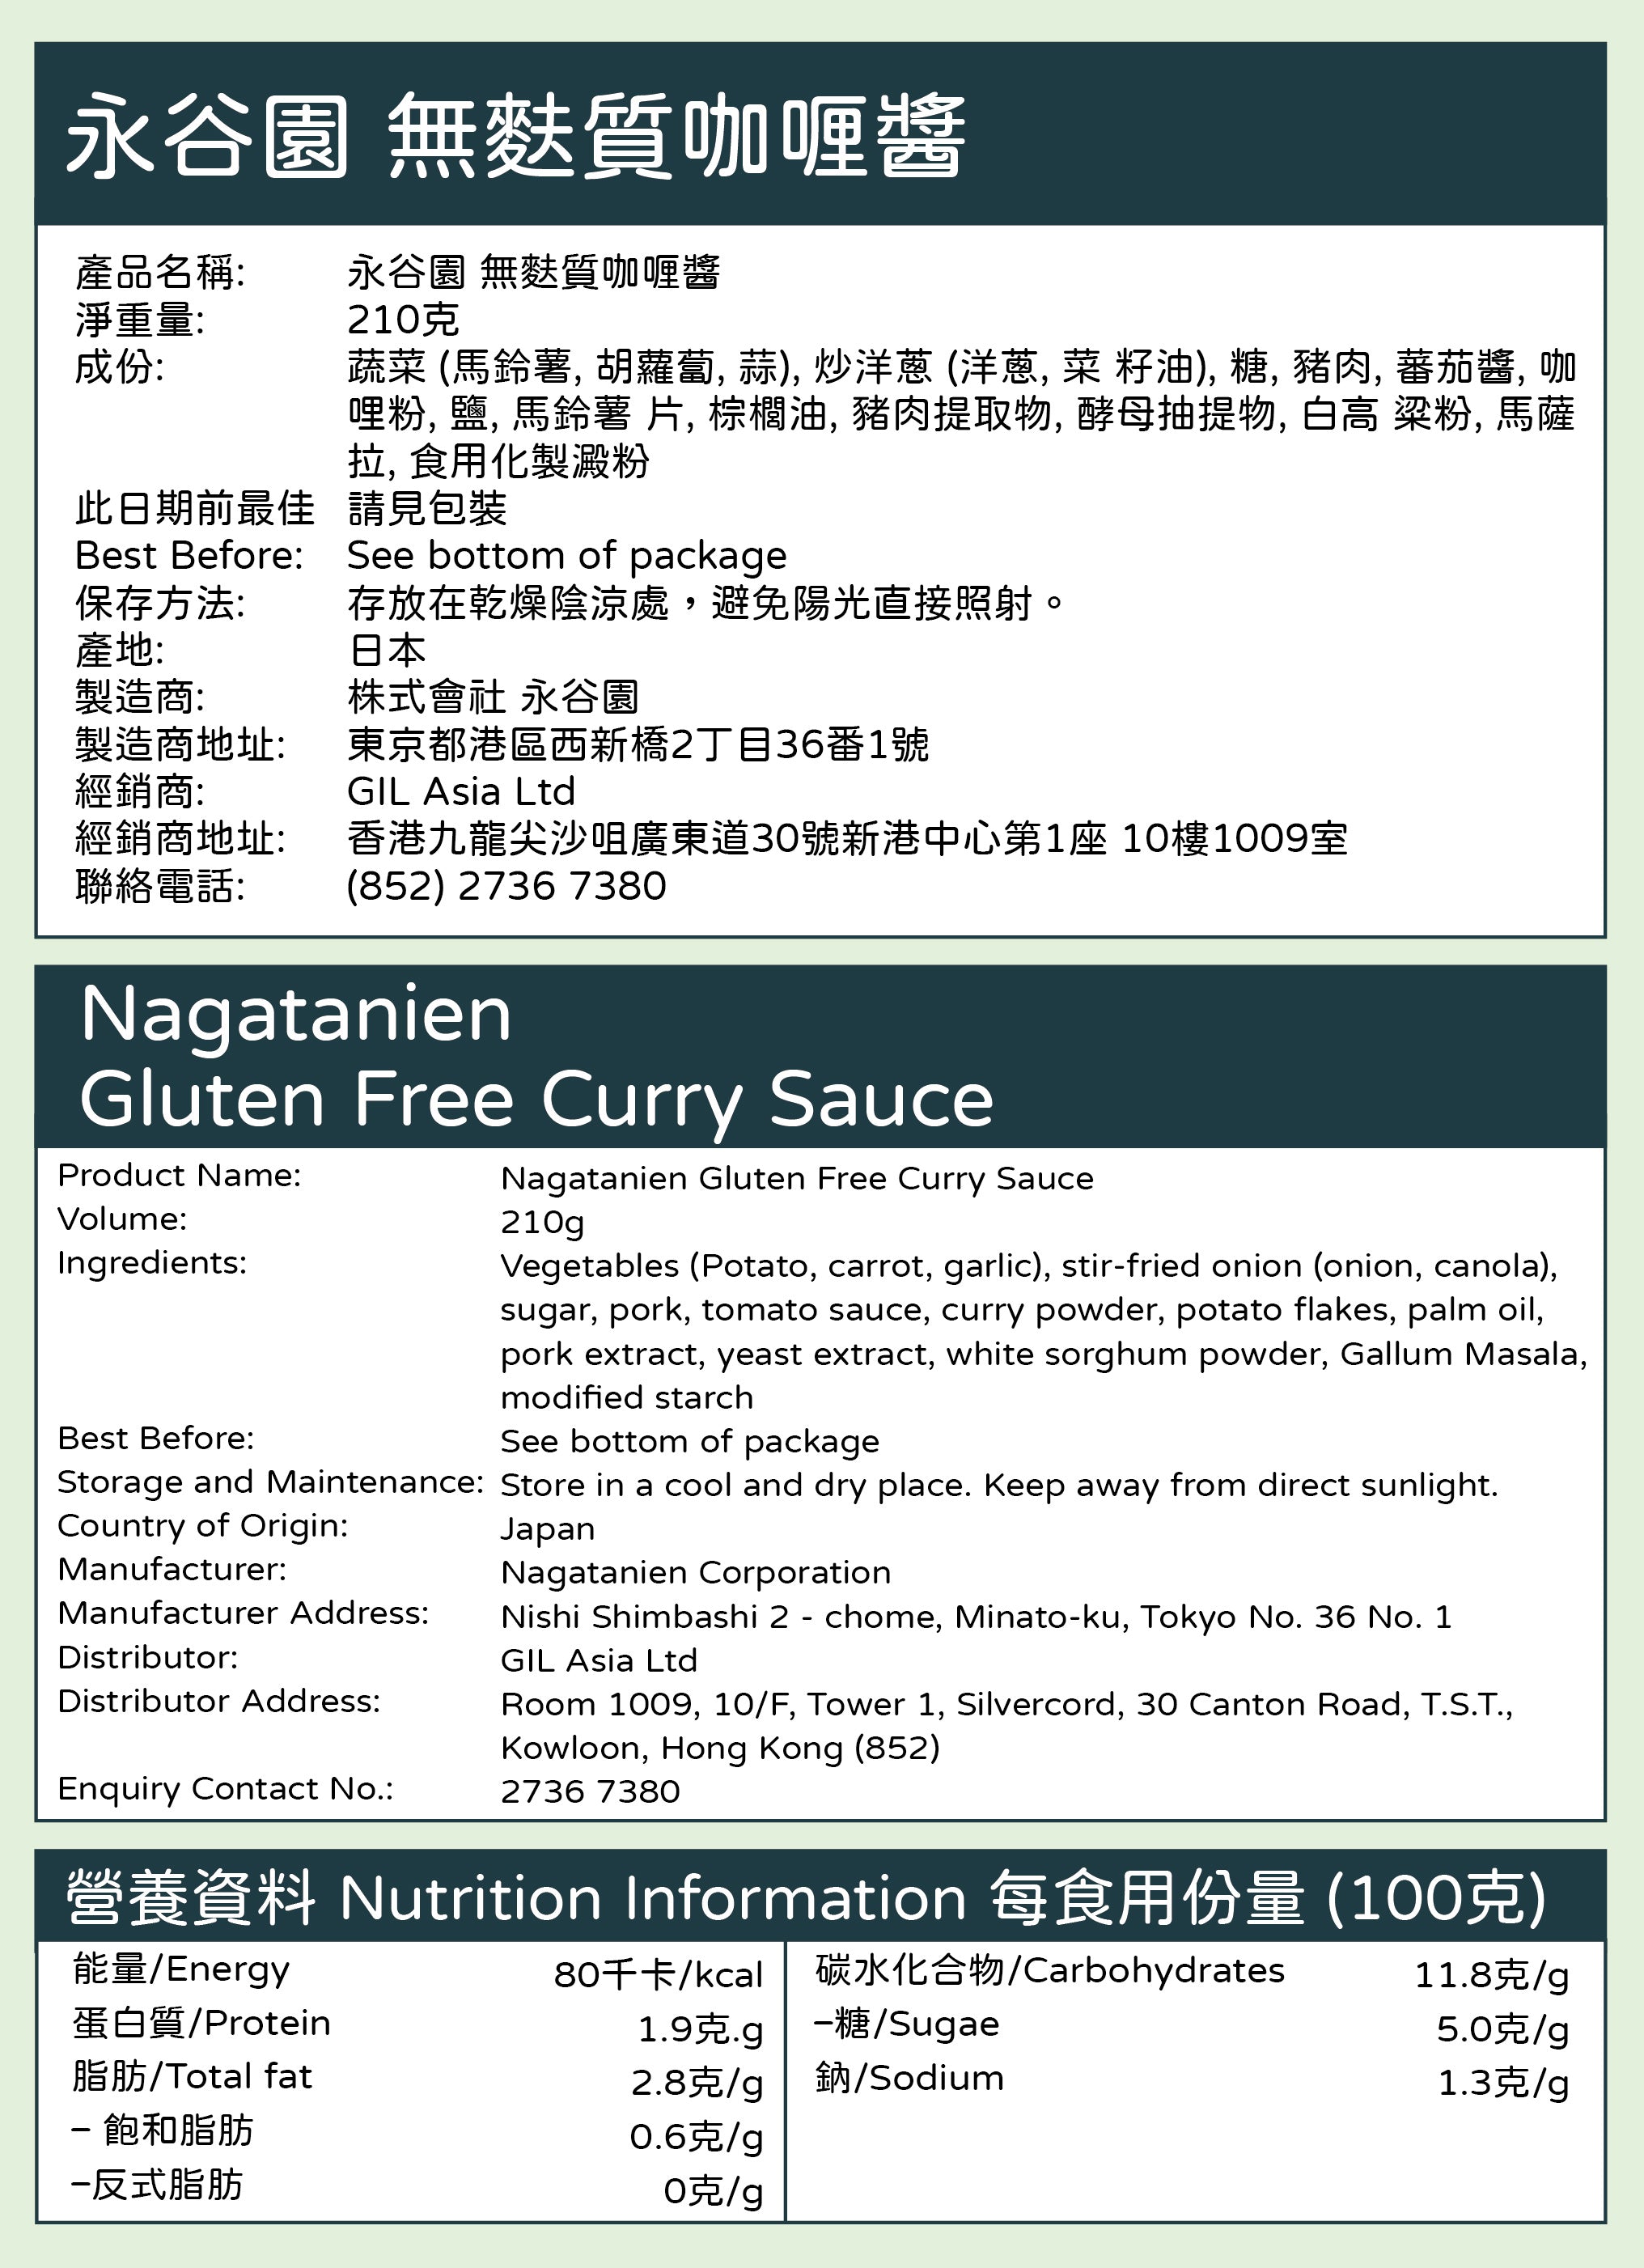 Nagatanien Gluten free curry sause (middle) [210g]